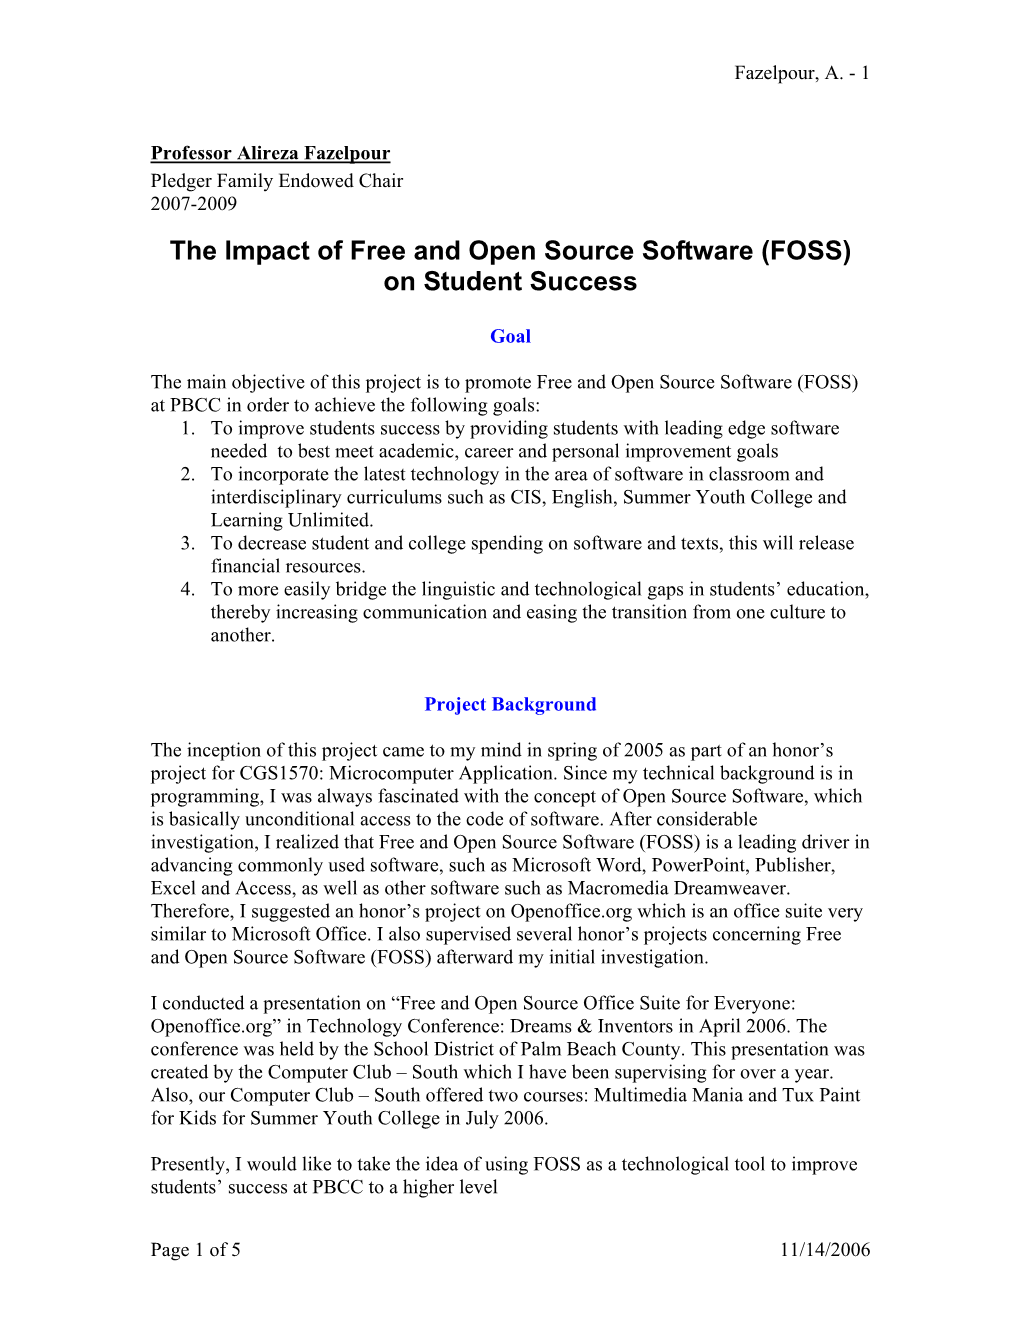 The Impact of Free and Open Source Software (FOSS) on Student Success